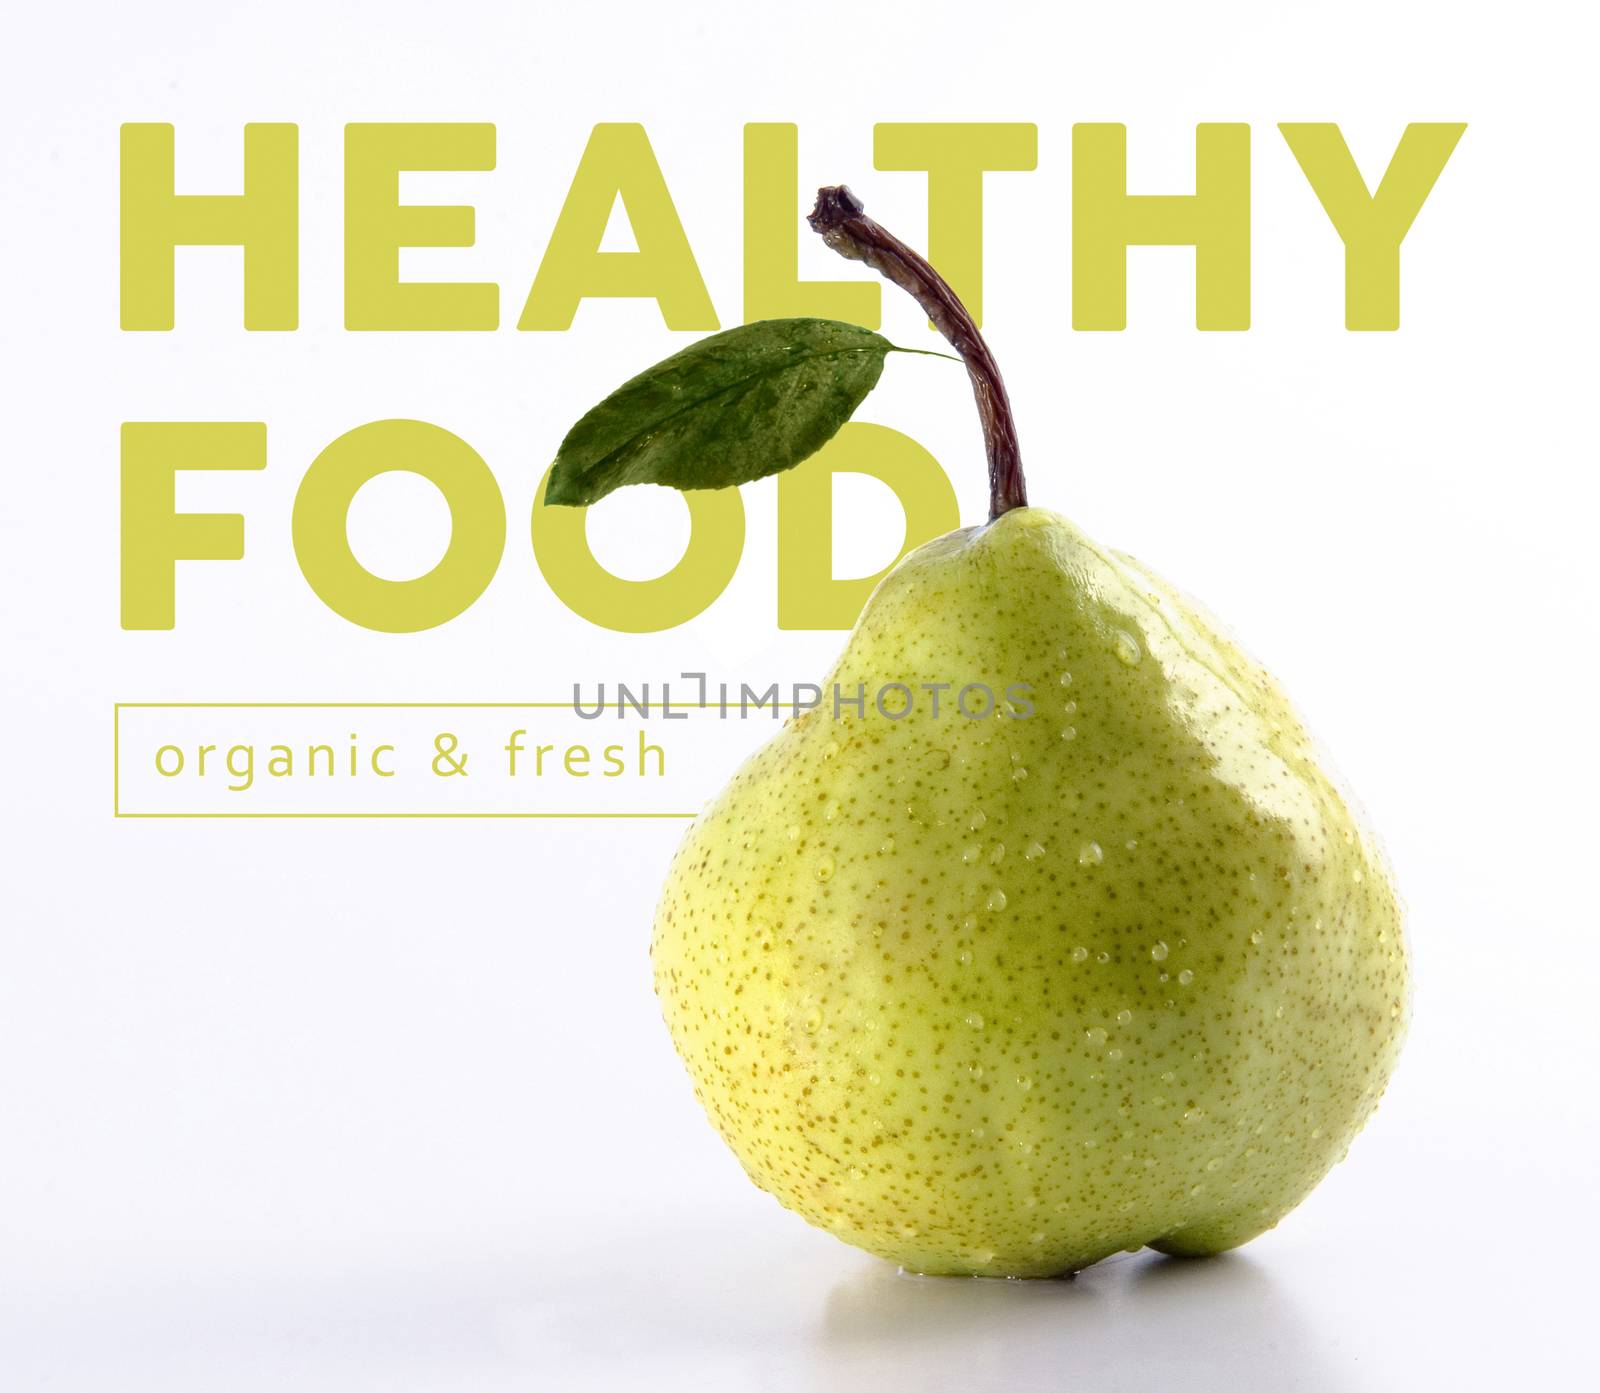 Healthy food pear fruit concept design by cienpies